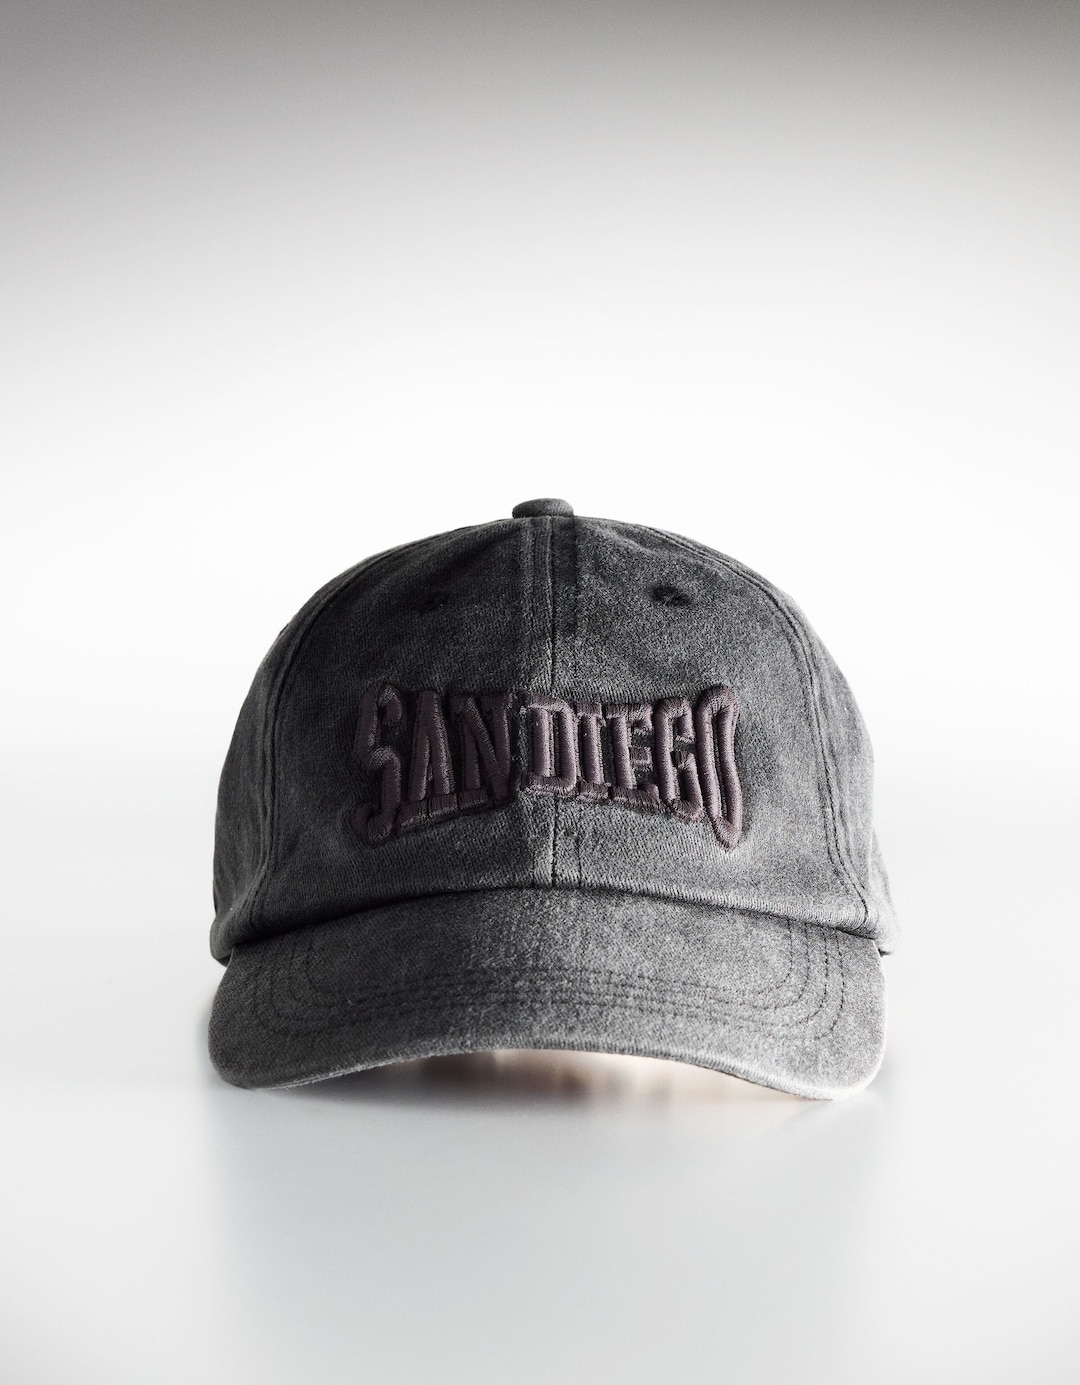 Basic cap with varsity embroidery